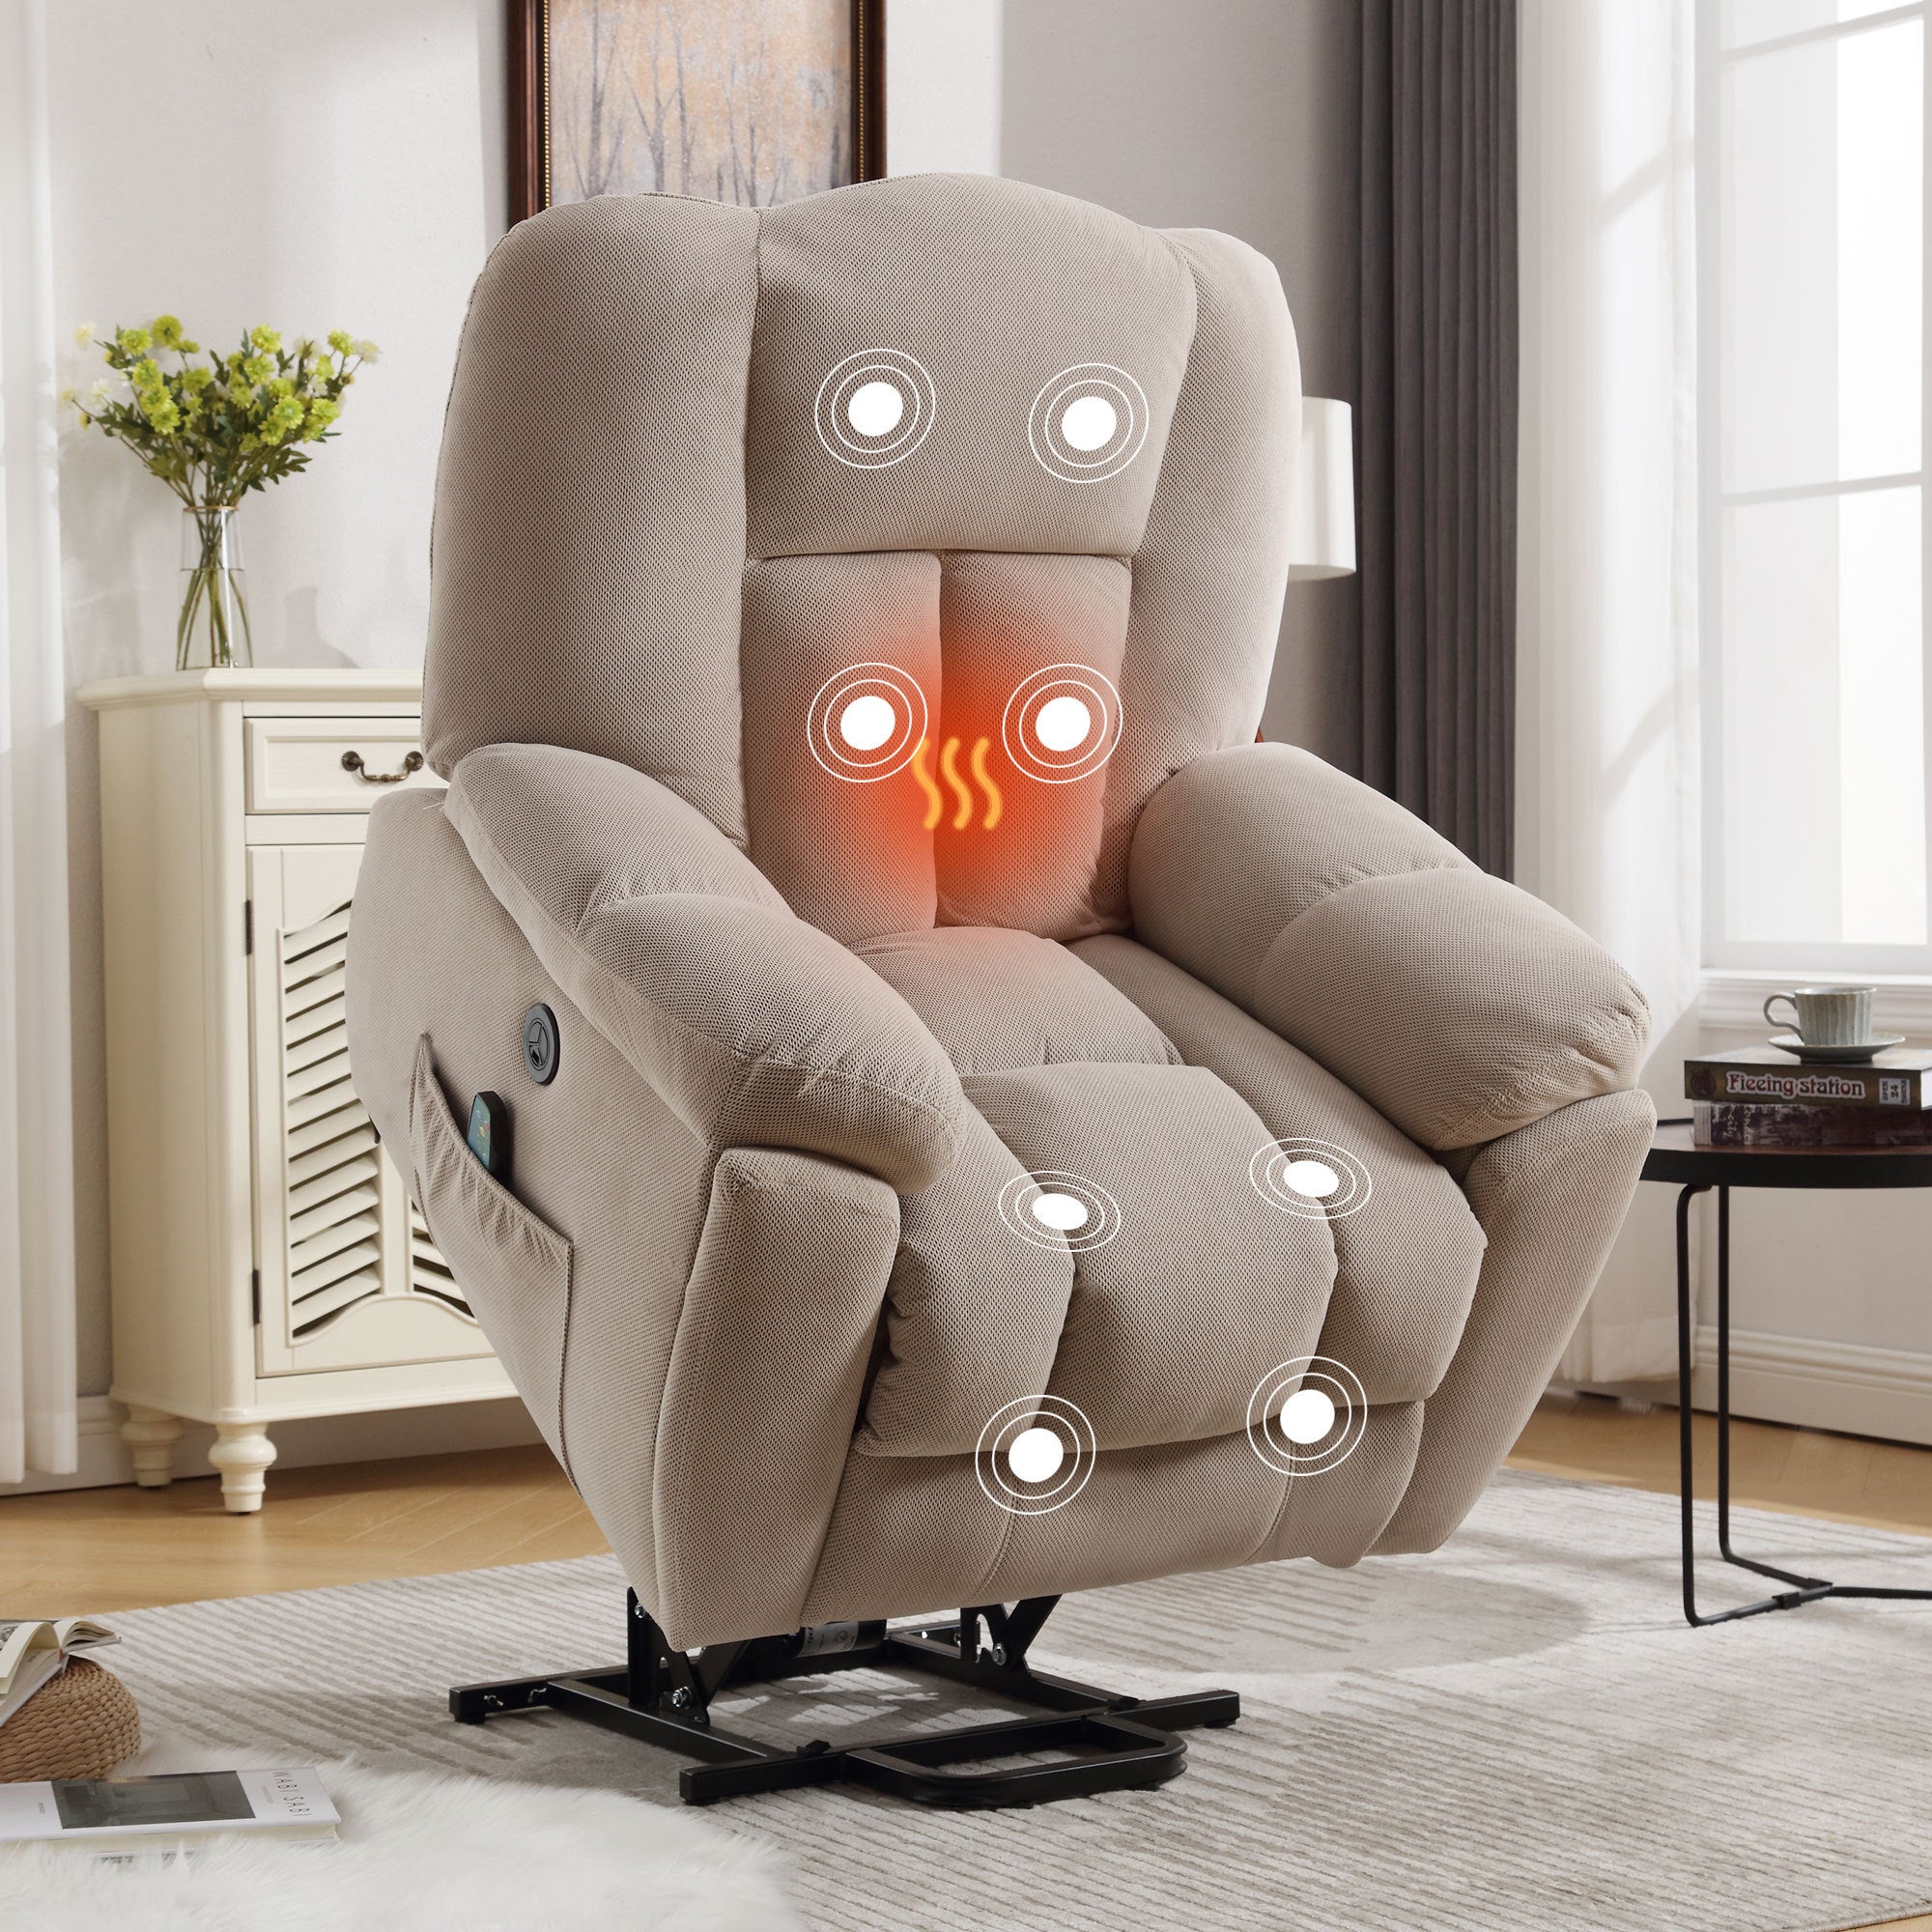 Jackson beige Fabric Power Lift Recliner Chair With Massage and Heat USB charge Port